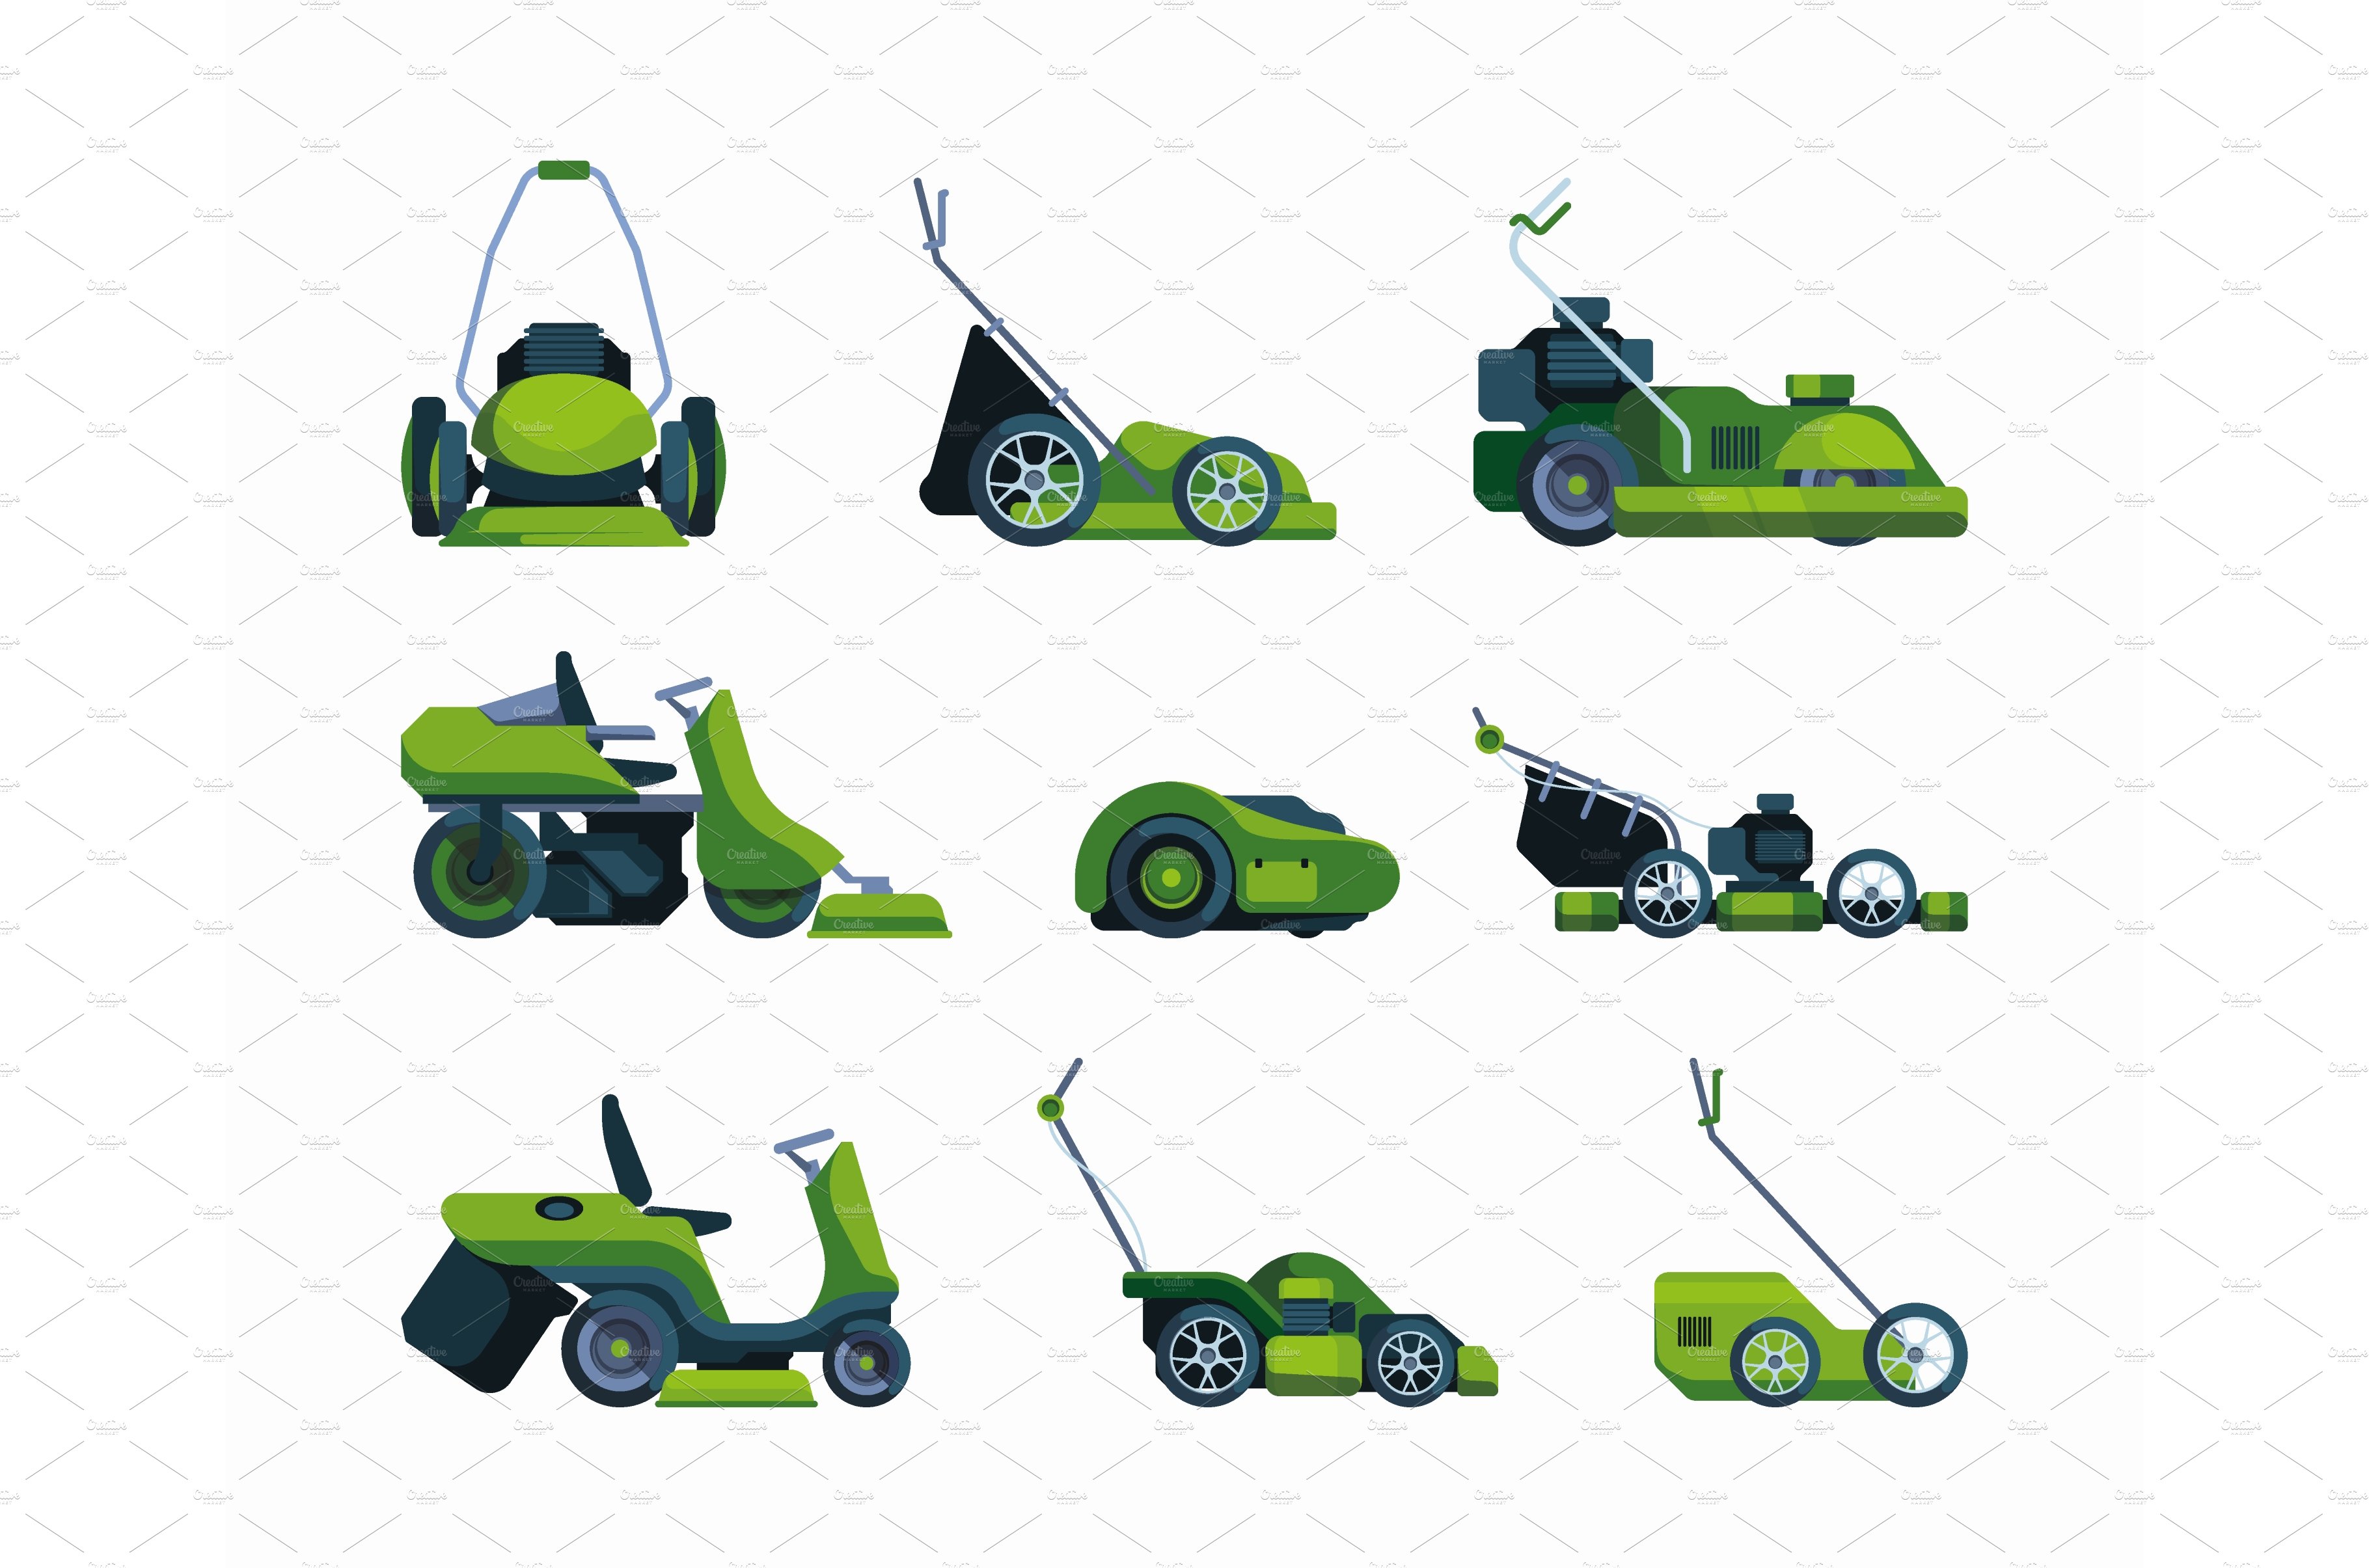 Lawn mowing. Gardening machines cover image.